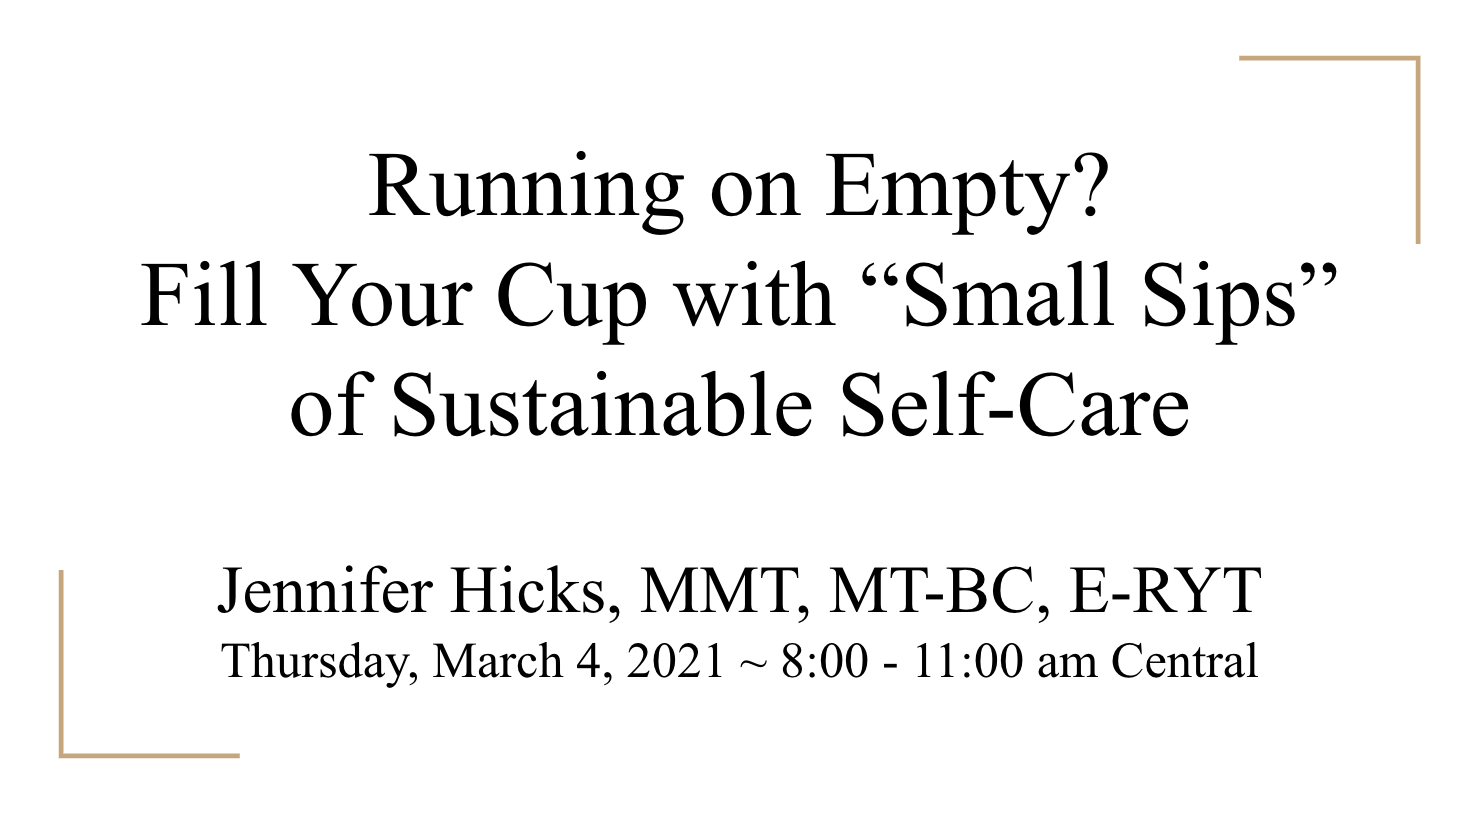 Running on Empty? Fill Your Cup with "Small Sips" of Sustainable Self-Care